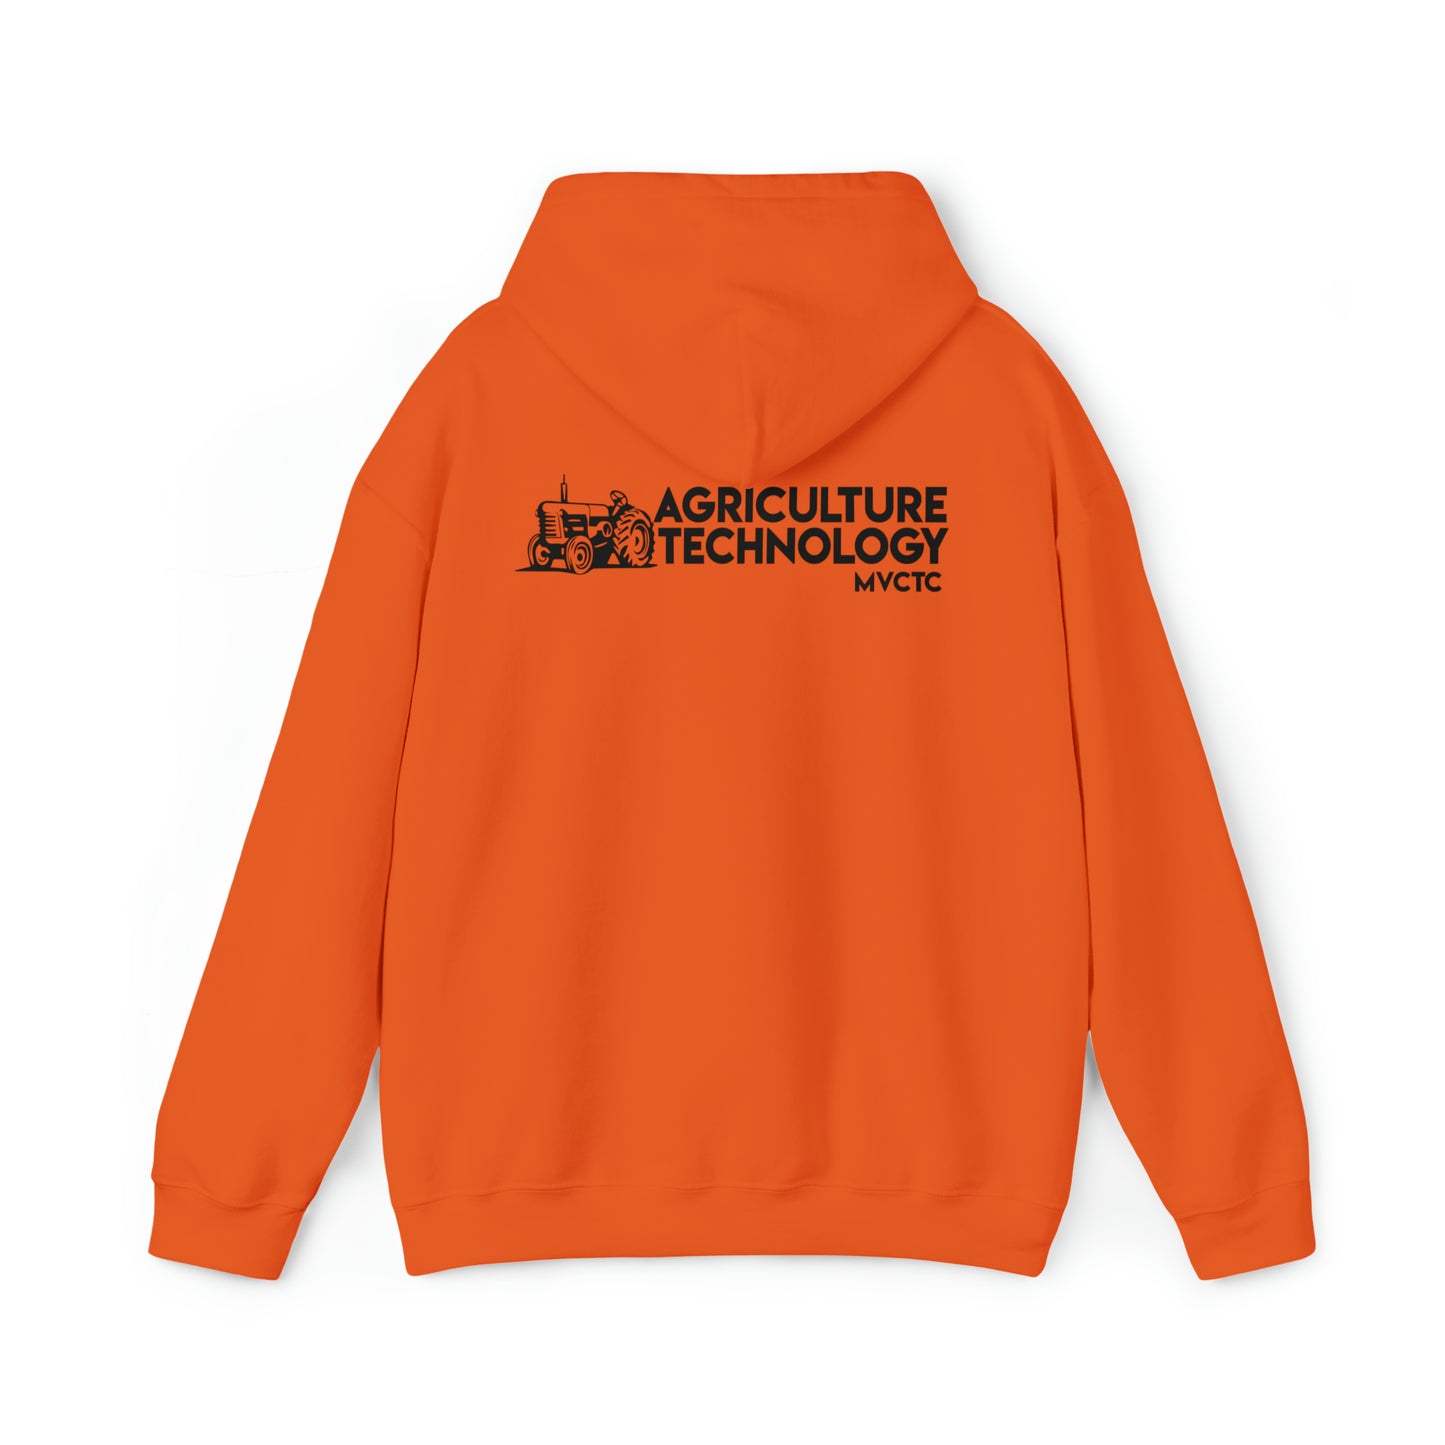 MVCTC- Agricultural Tech Hooded Sweatshirt